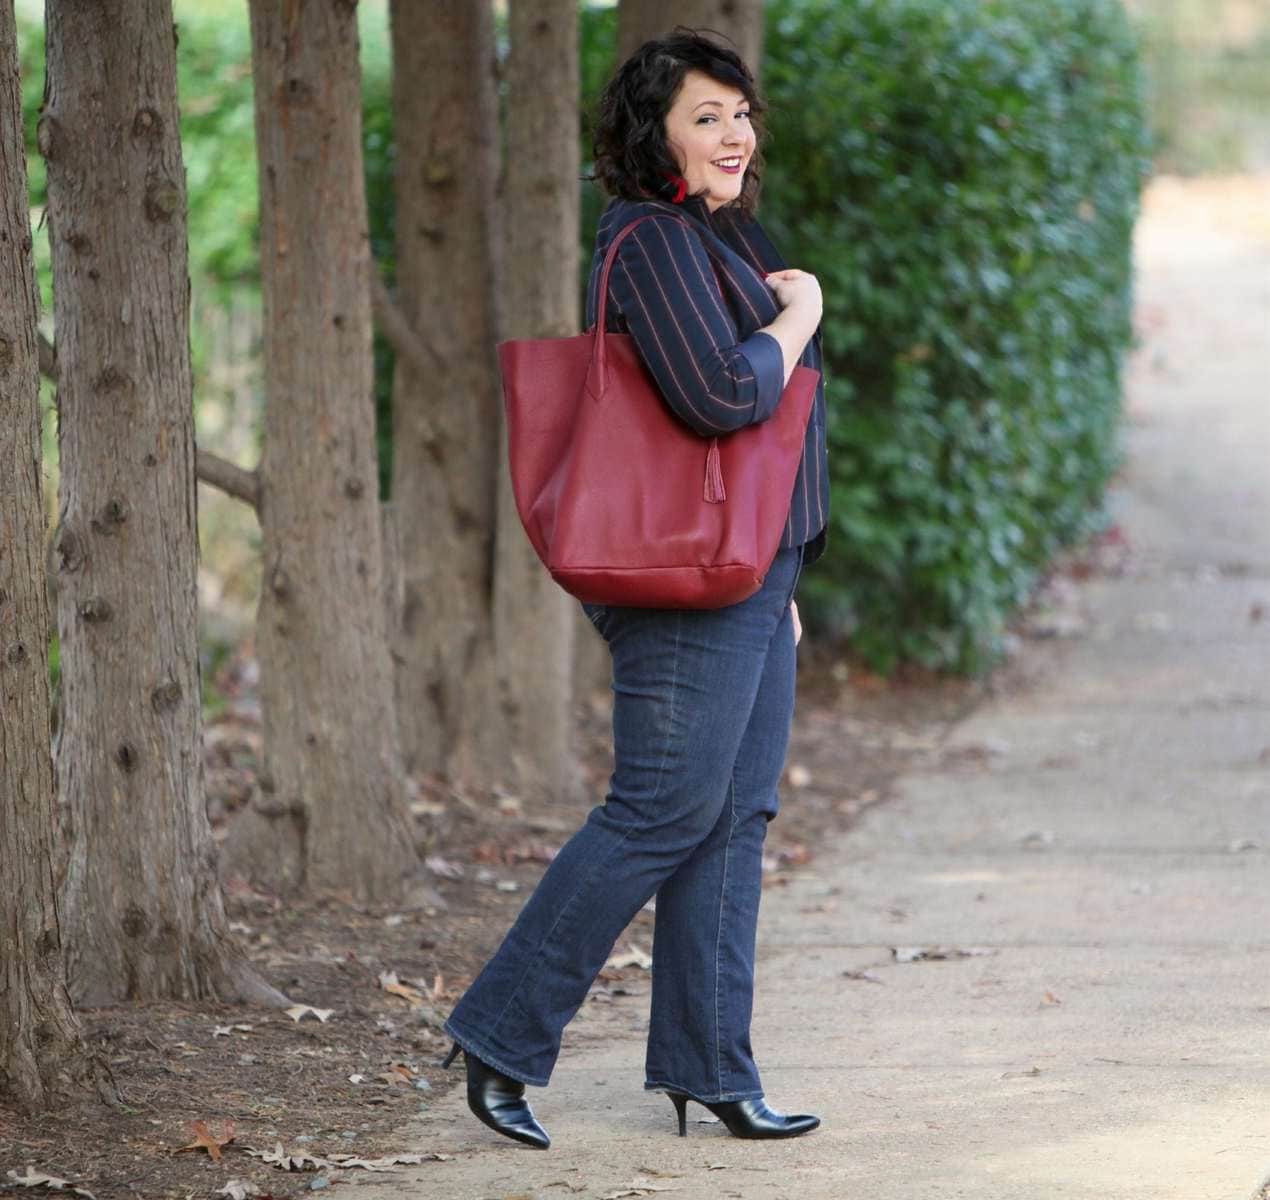 Wardrobe Oxygen wearing a blazer and jeans from Talbots with ADORA Bags tote in Limited Edition Marsala Leather